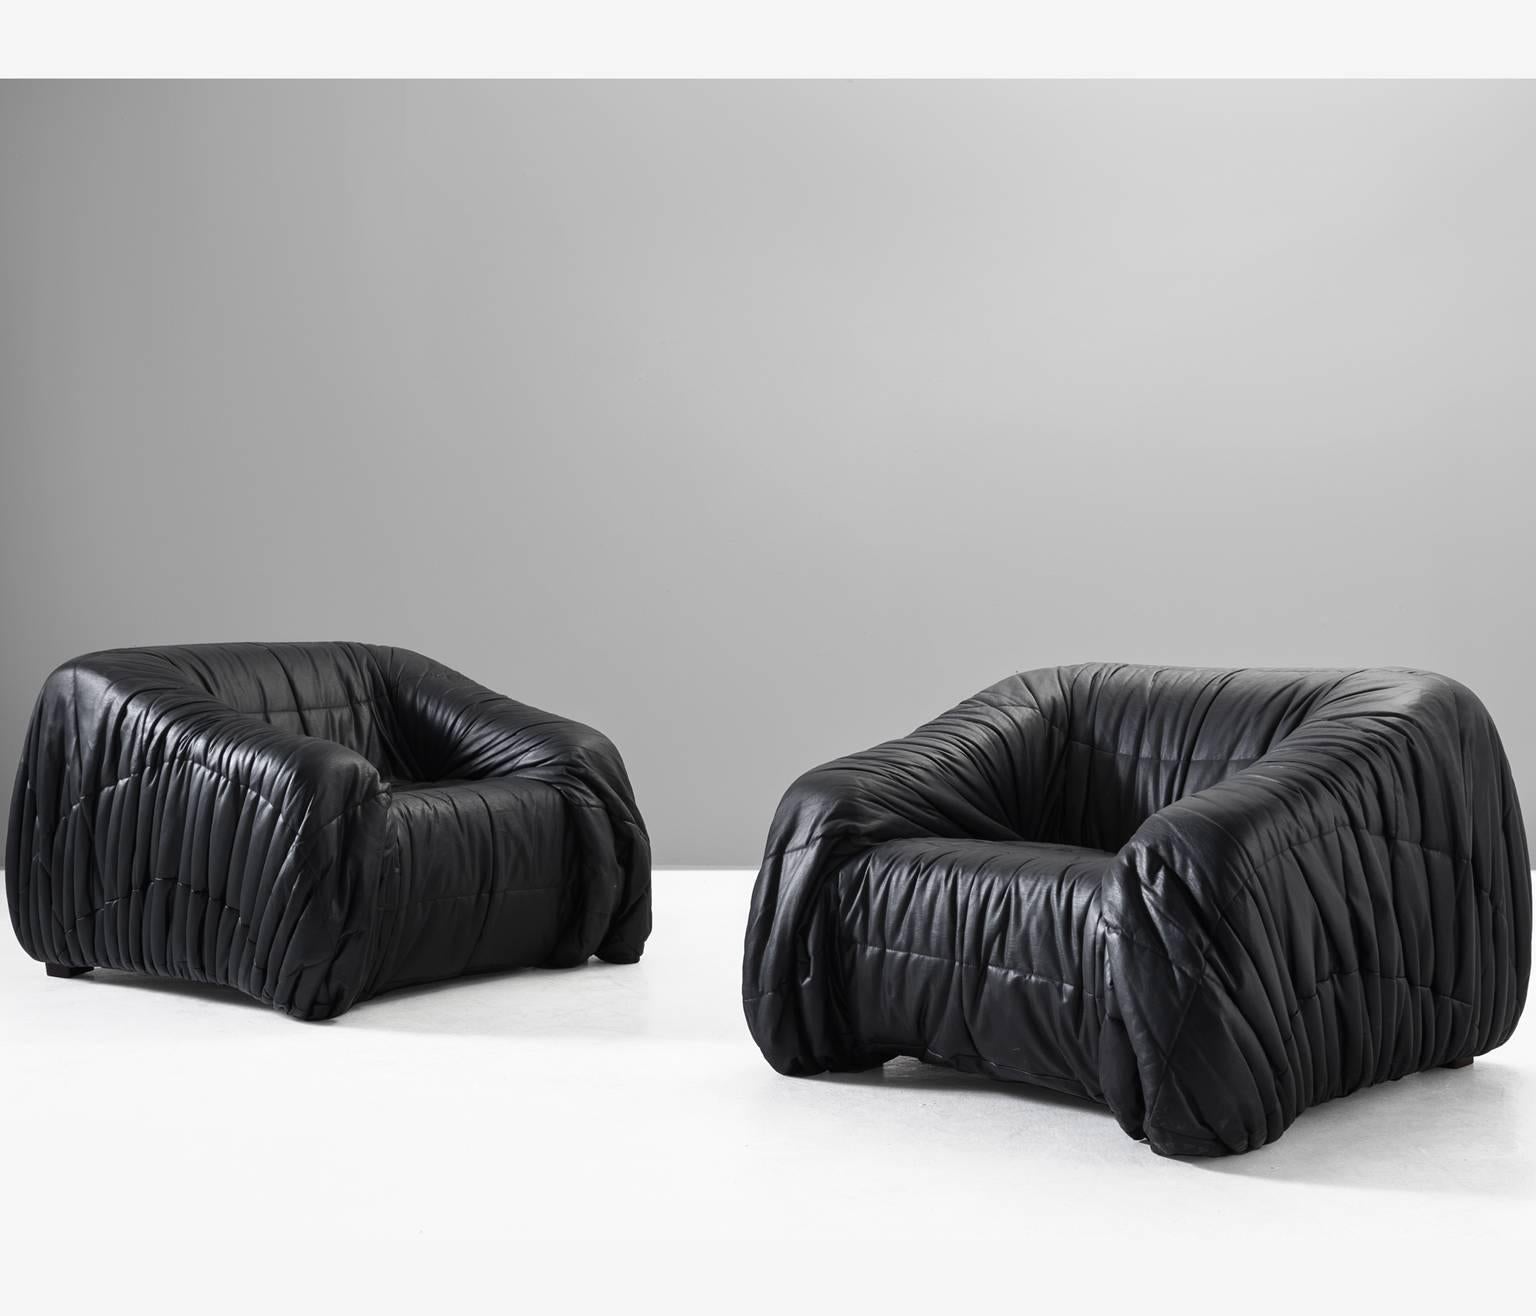 'Piumino' lounge chairs by Jonathan de Pas, Donato D'urbino & Paolo Lomazzi for Dell'Oca, Italy, 1970. 

These lounge chairs are completely moulded out of foam and covered with folded black, thick butter-soft leather. One of the mean traits of these